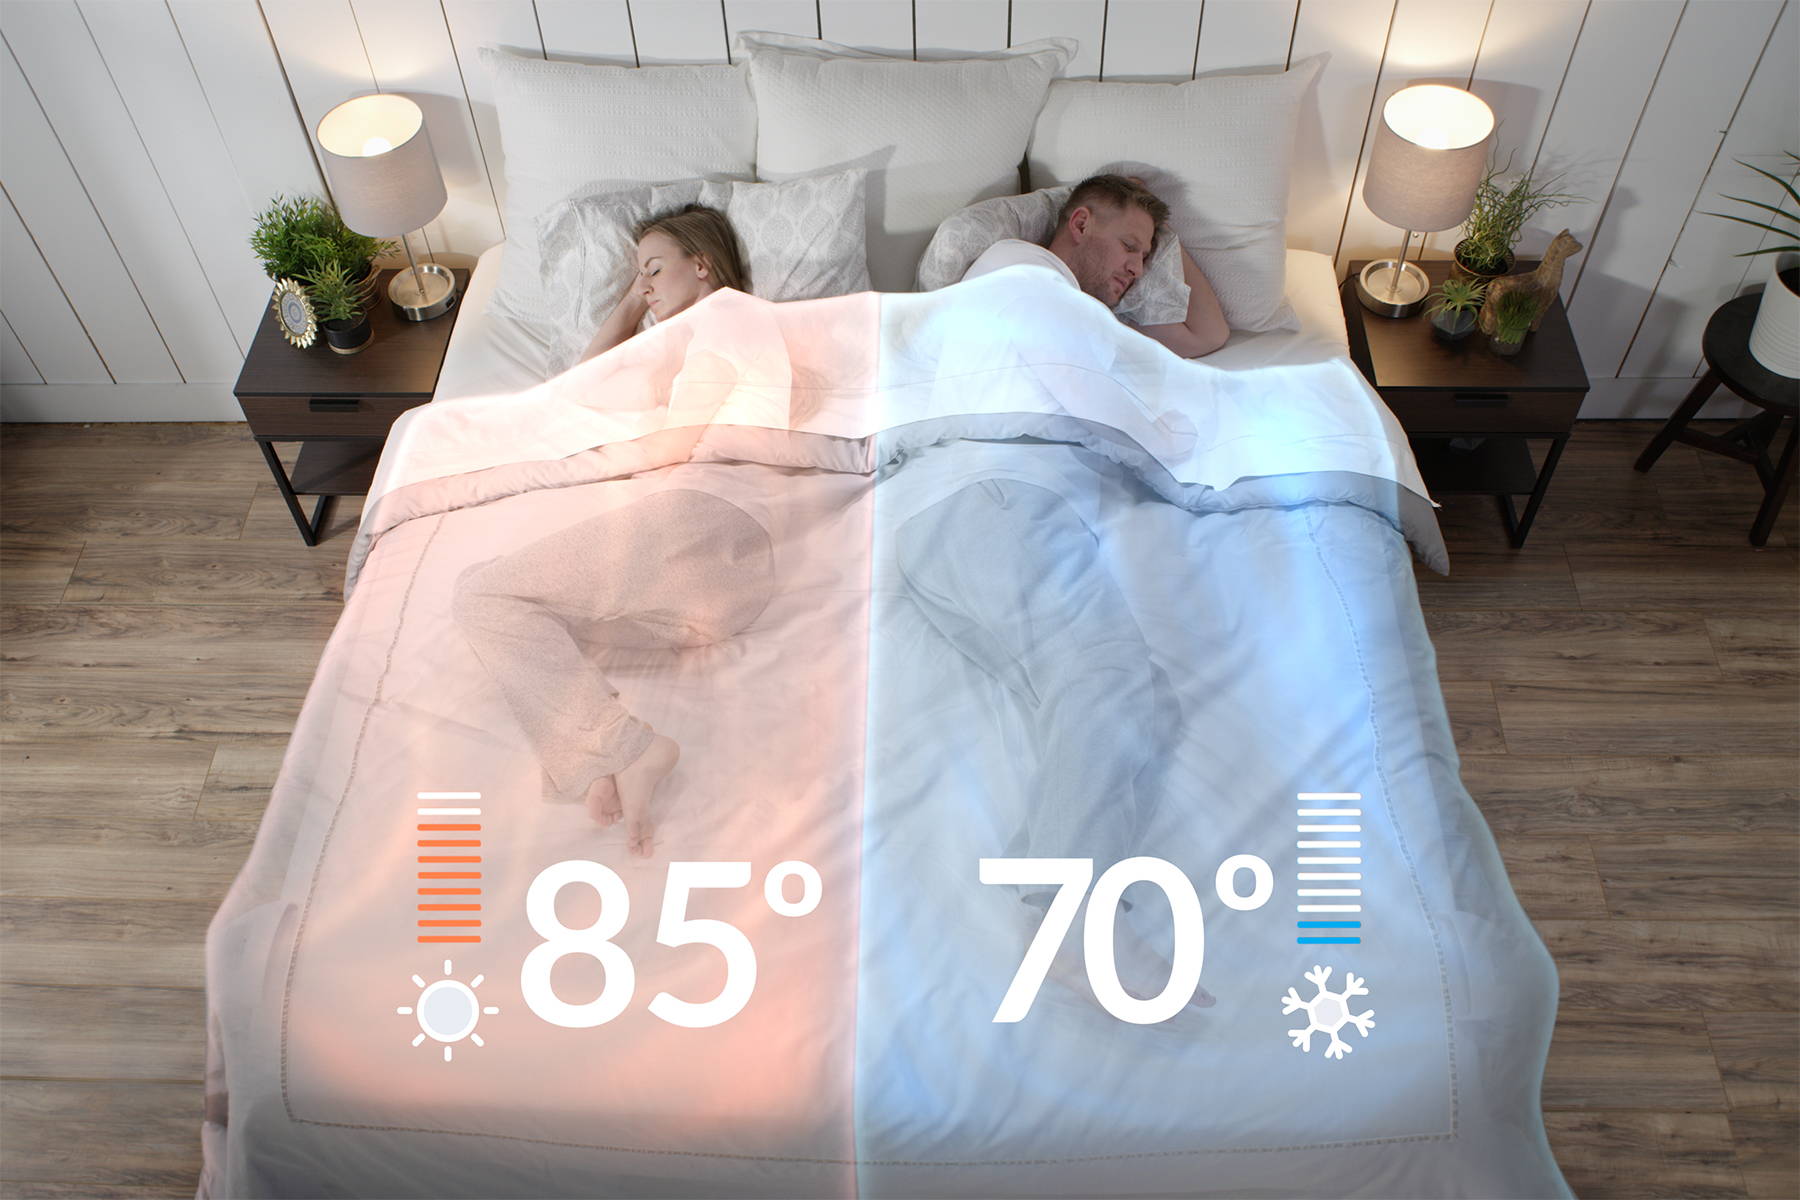 The Heating and Cooling Blanket That's Saving Marriages